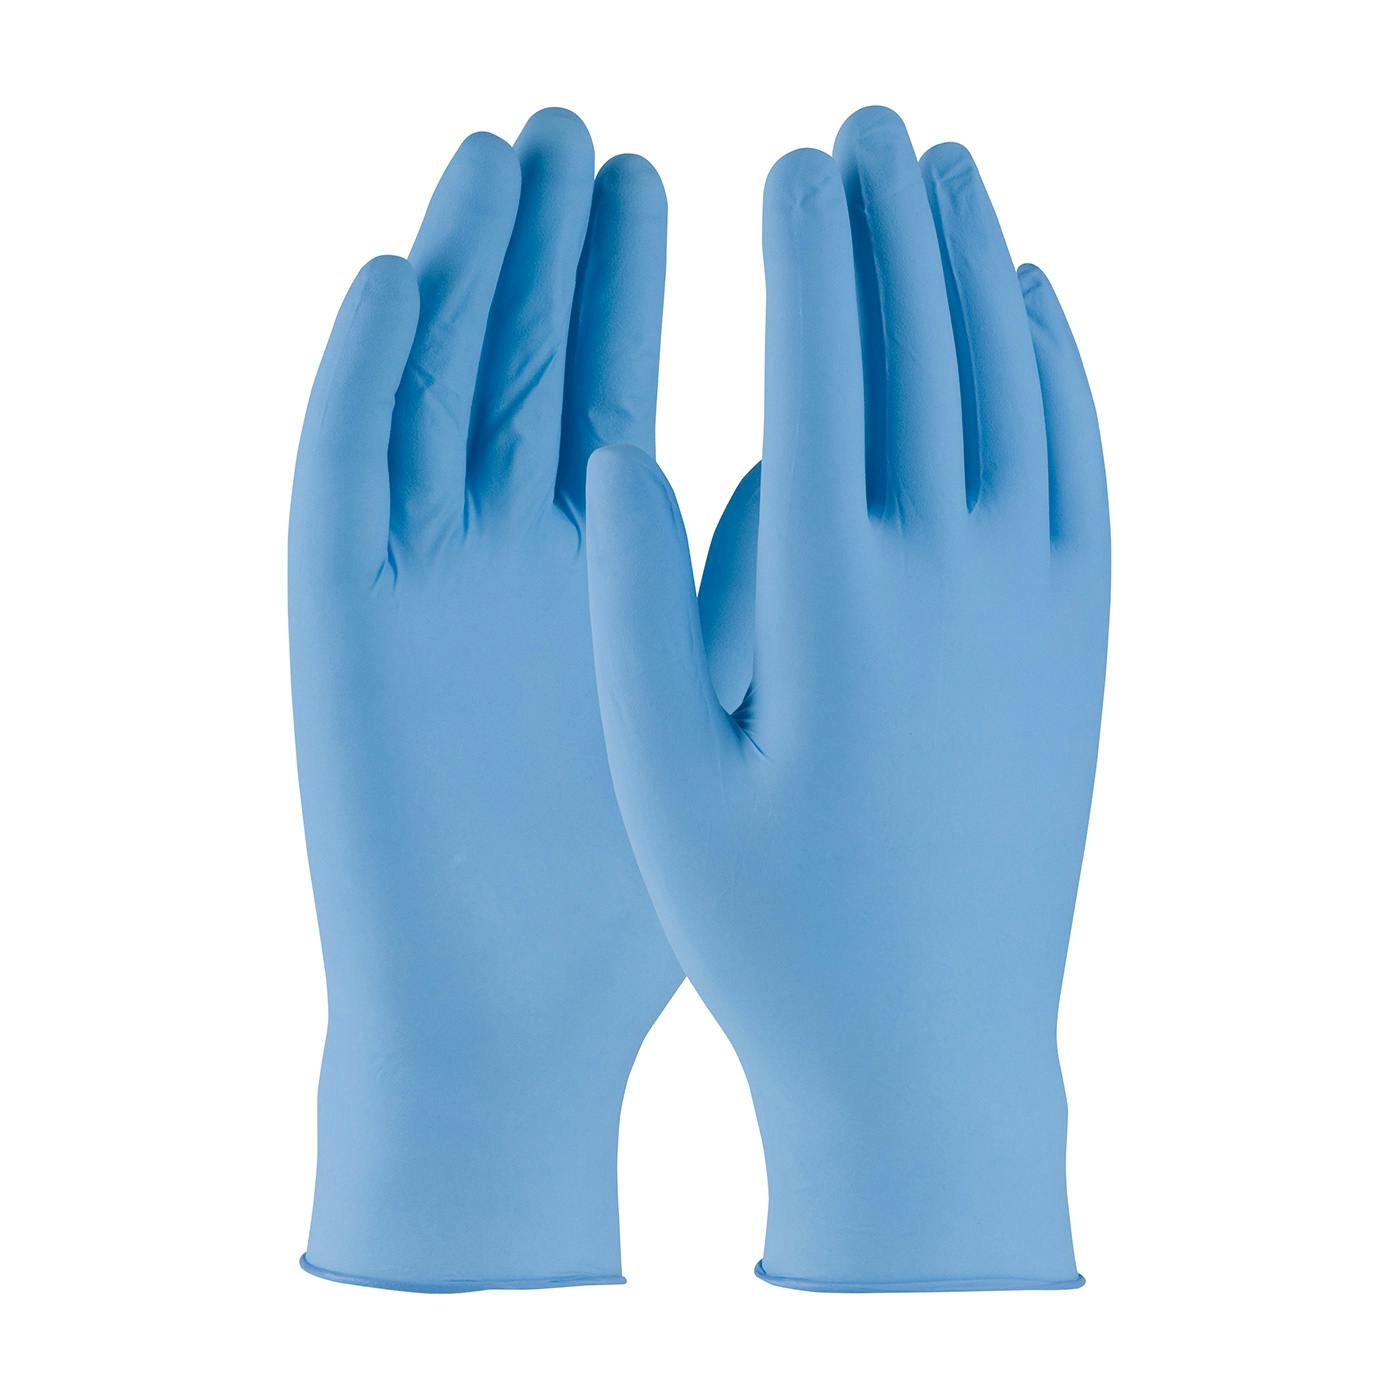 Ambi-dex® Turbo Disposable Nitrile Glove, Powder Free with Textured Grip - 5 mil (63-332PF)_1